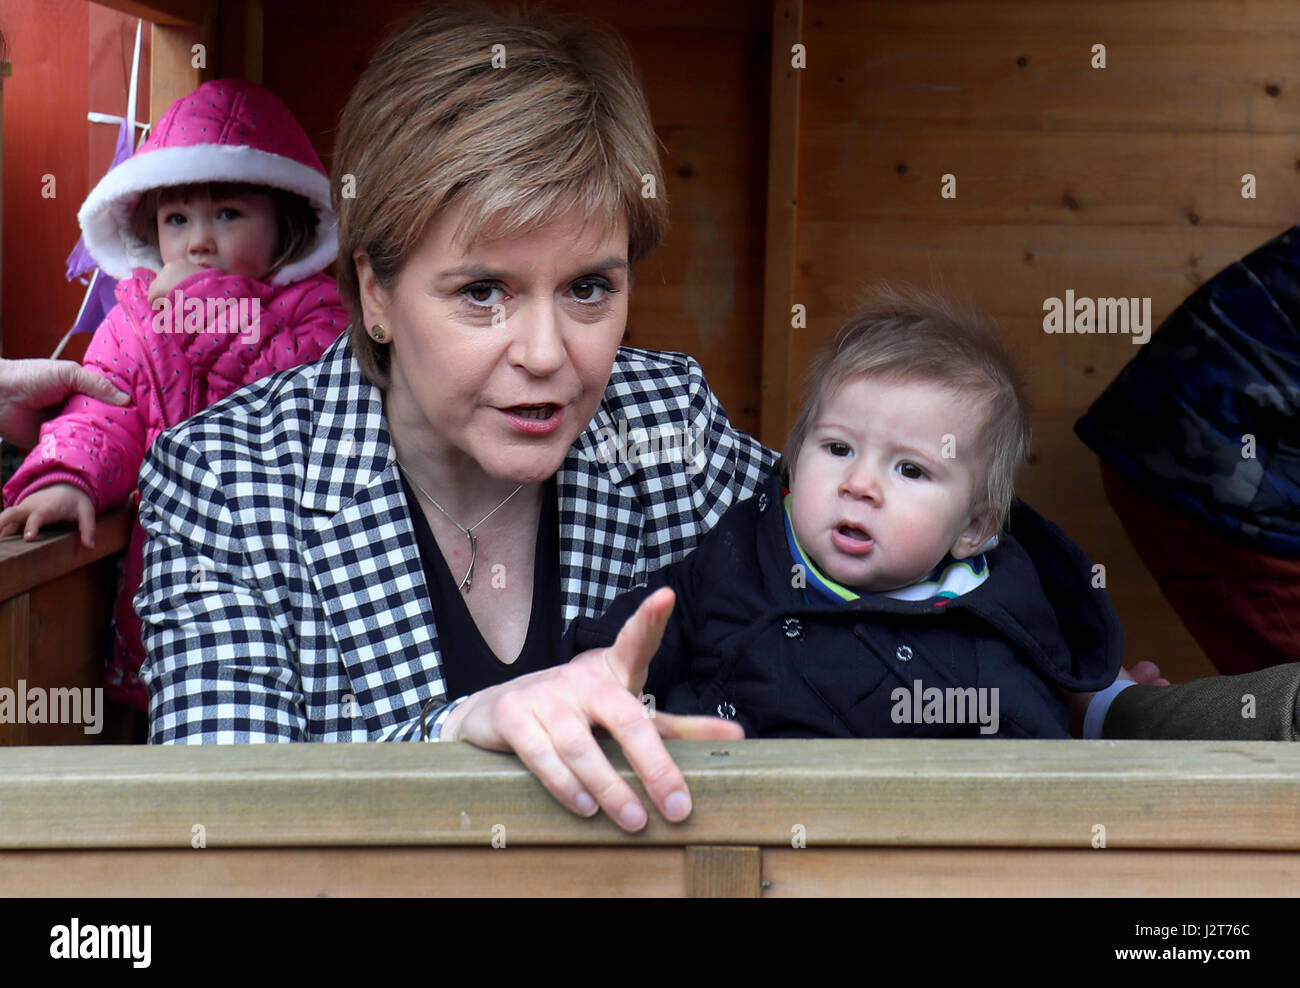 SNP leader Nicola Sturgeon with Alastair Ruddick, 9 months, during a visit to to the Dreams Daycare nursery in Insch, Aberdeenshire, on the election campaign trail. Stock Photo